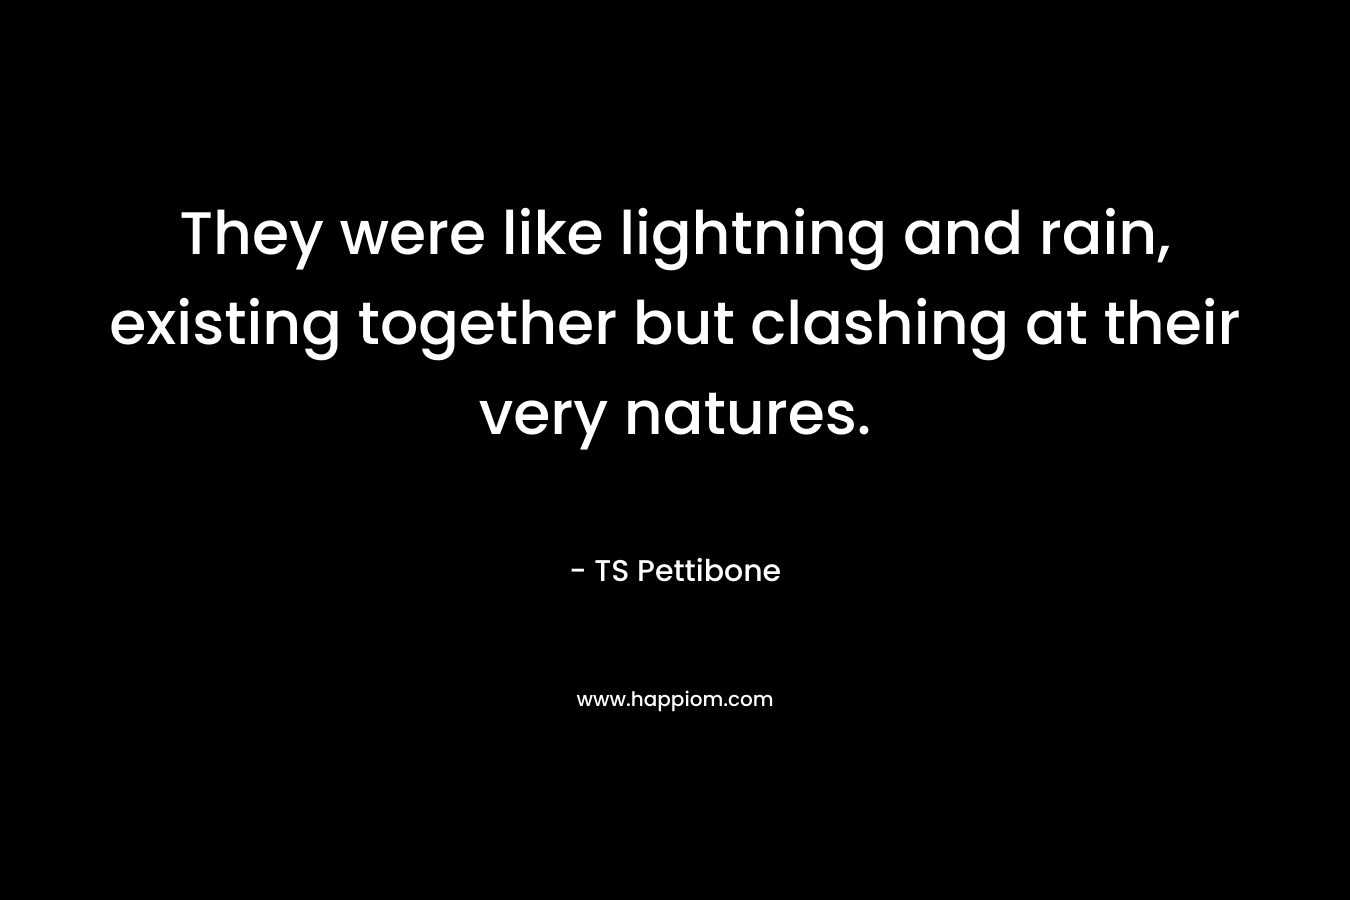 They were like lightning and rain, existing together but clashing at their very natures.